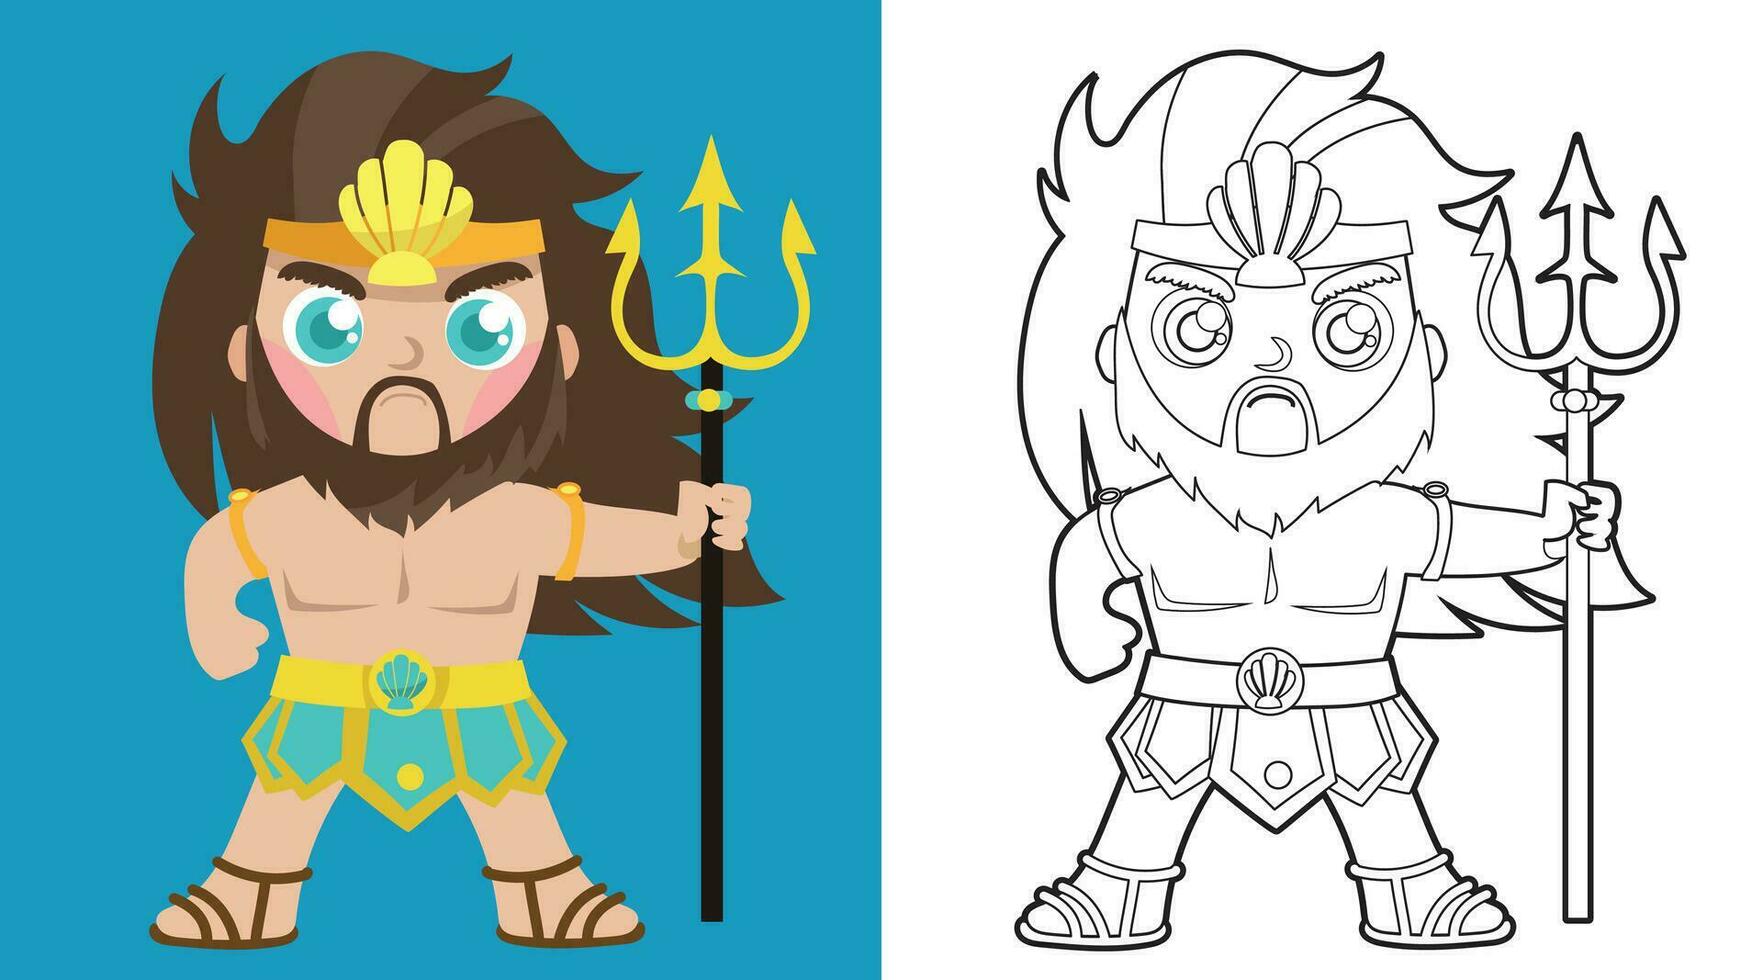 Colouring worksheet ancient Greece mythology. Greek deity theme elements. Coloring page activity for kids vector